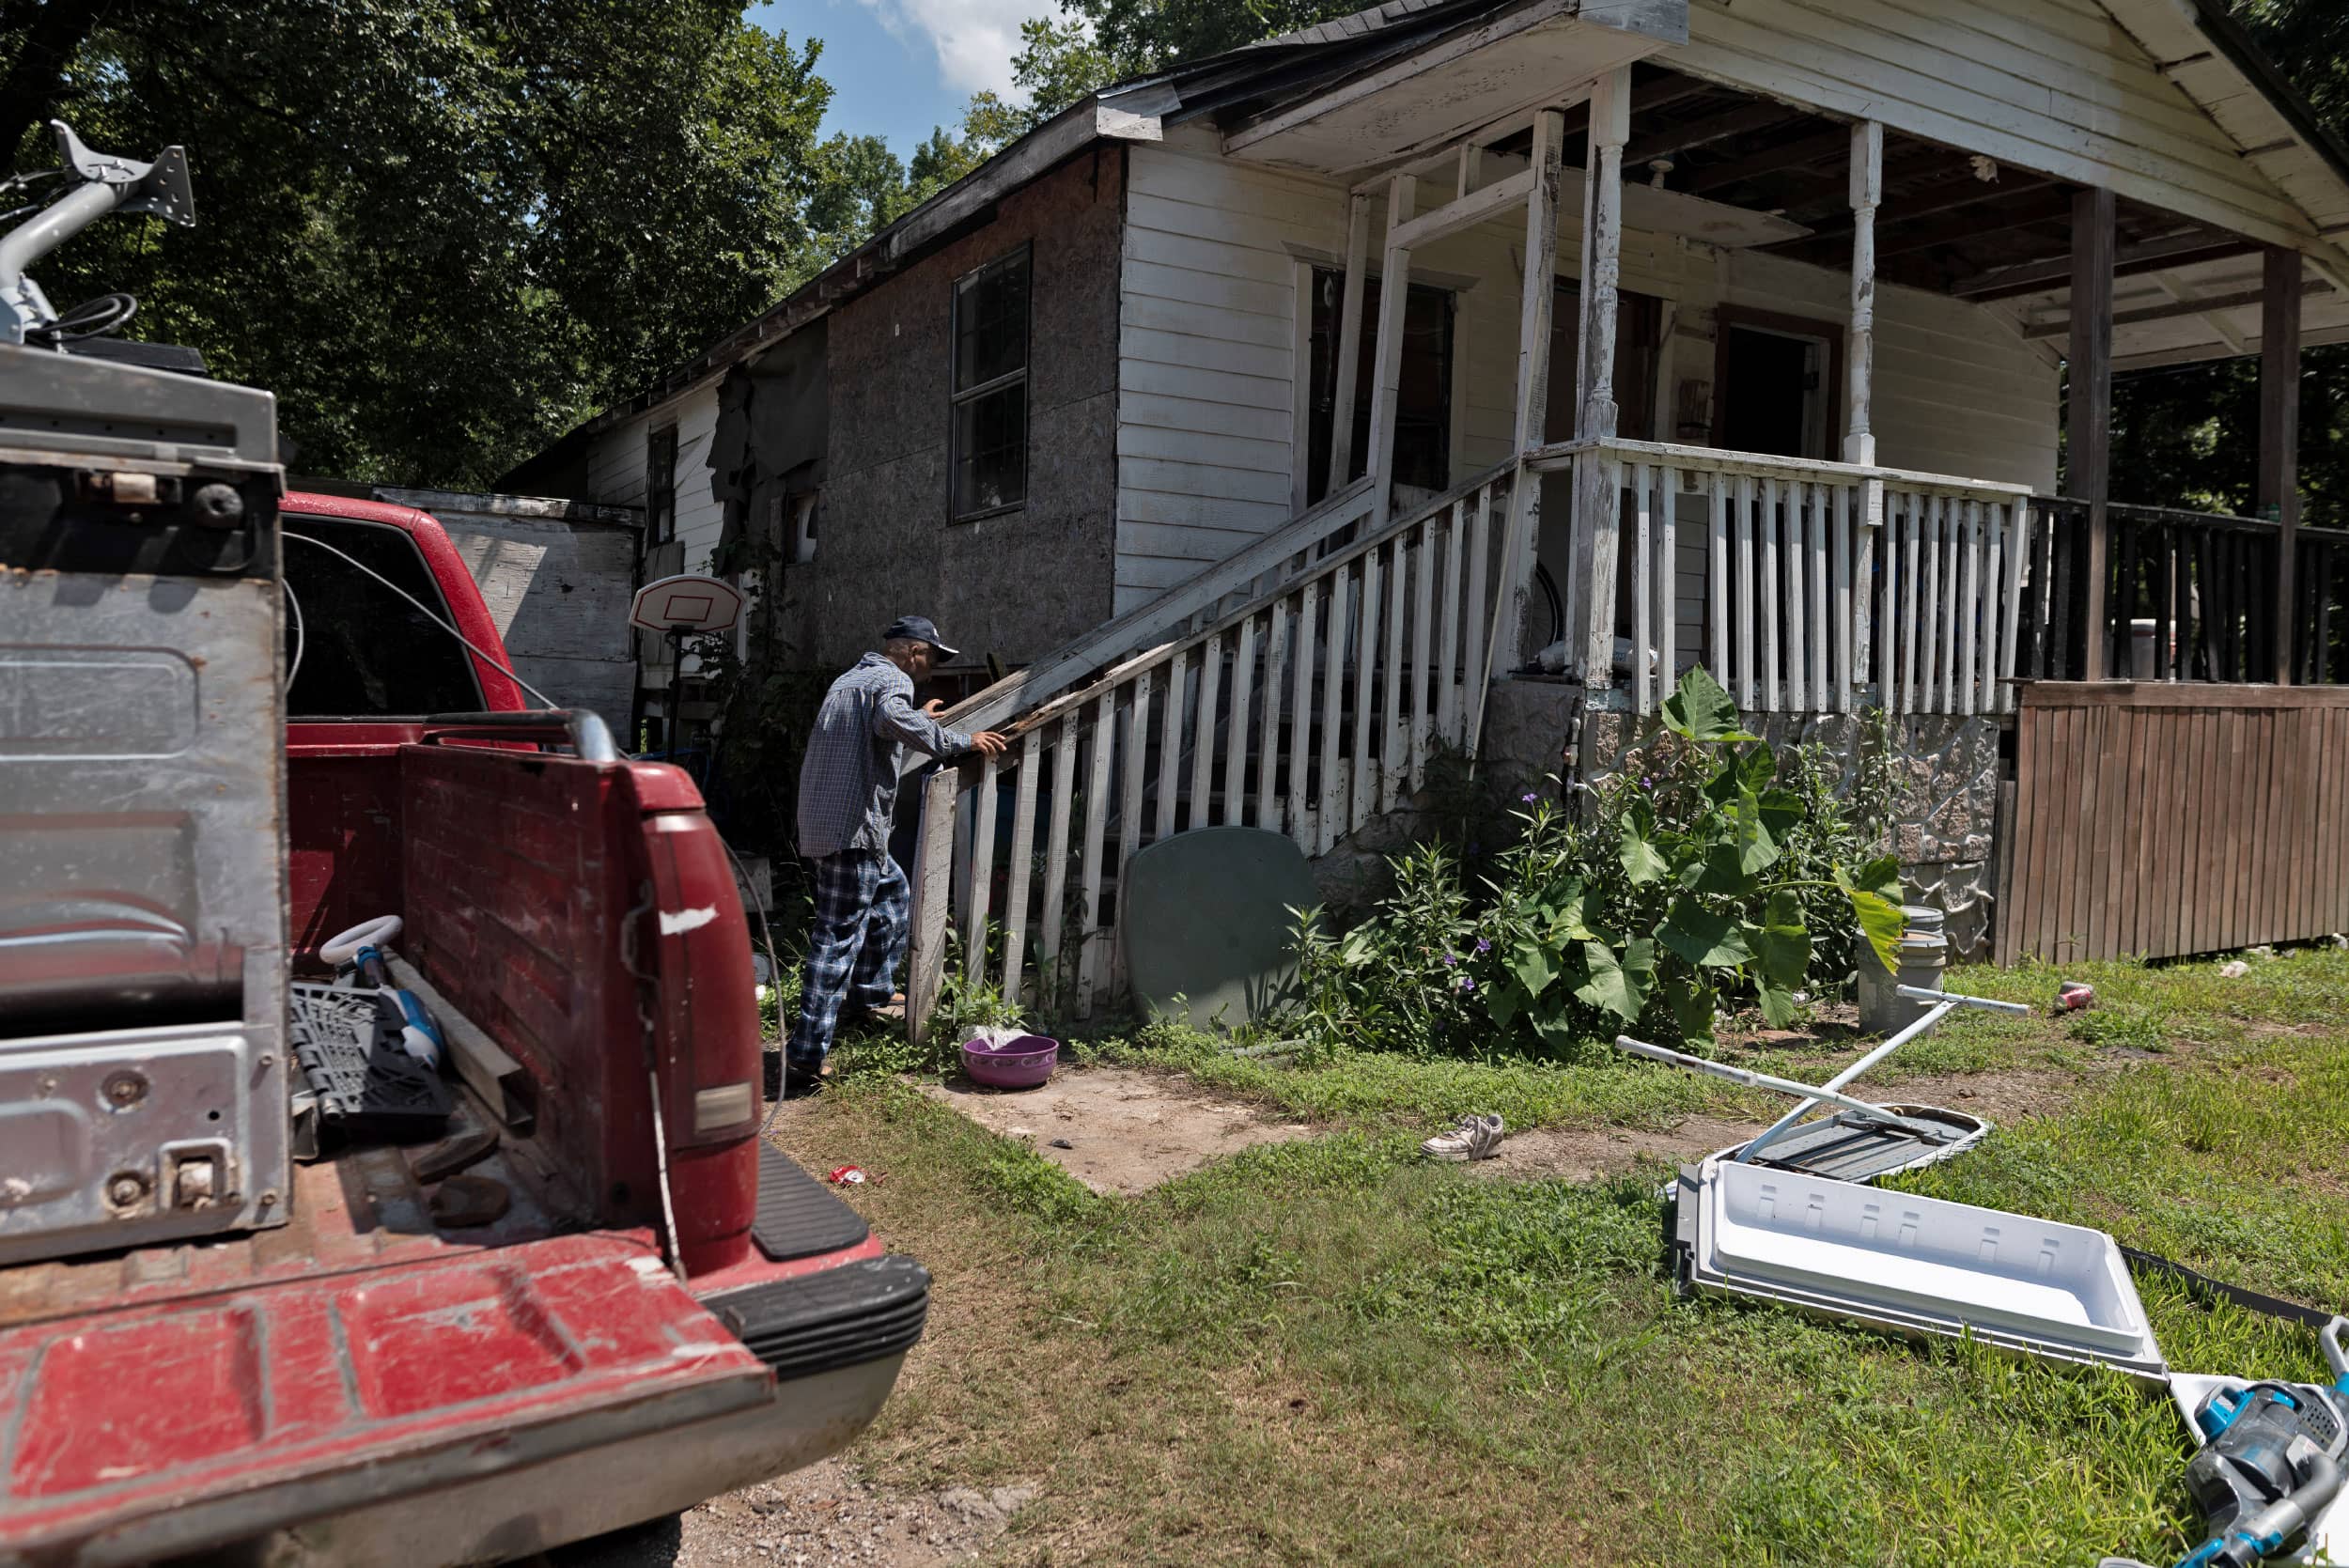 A man walks up the steps to his home with a truck parked out front